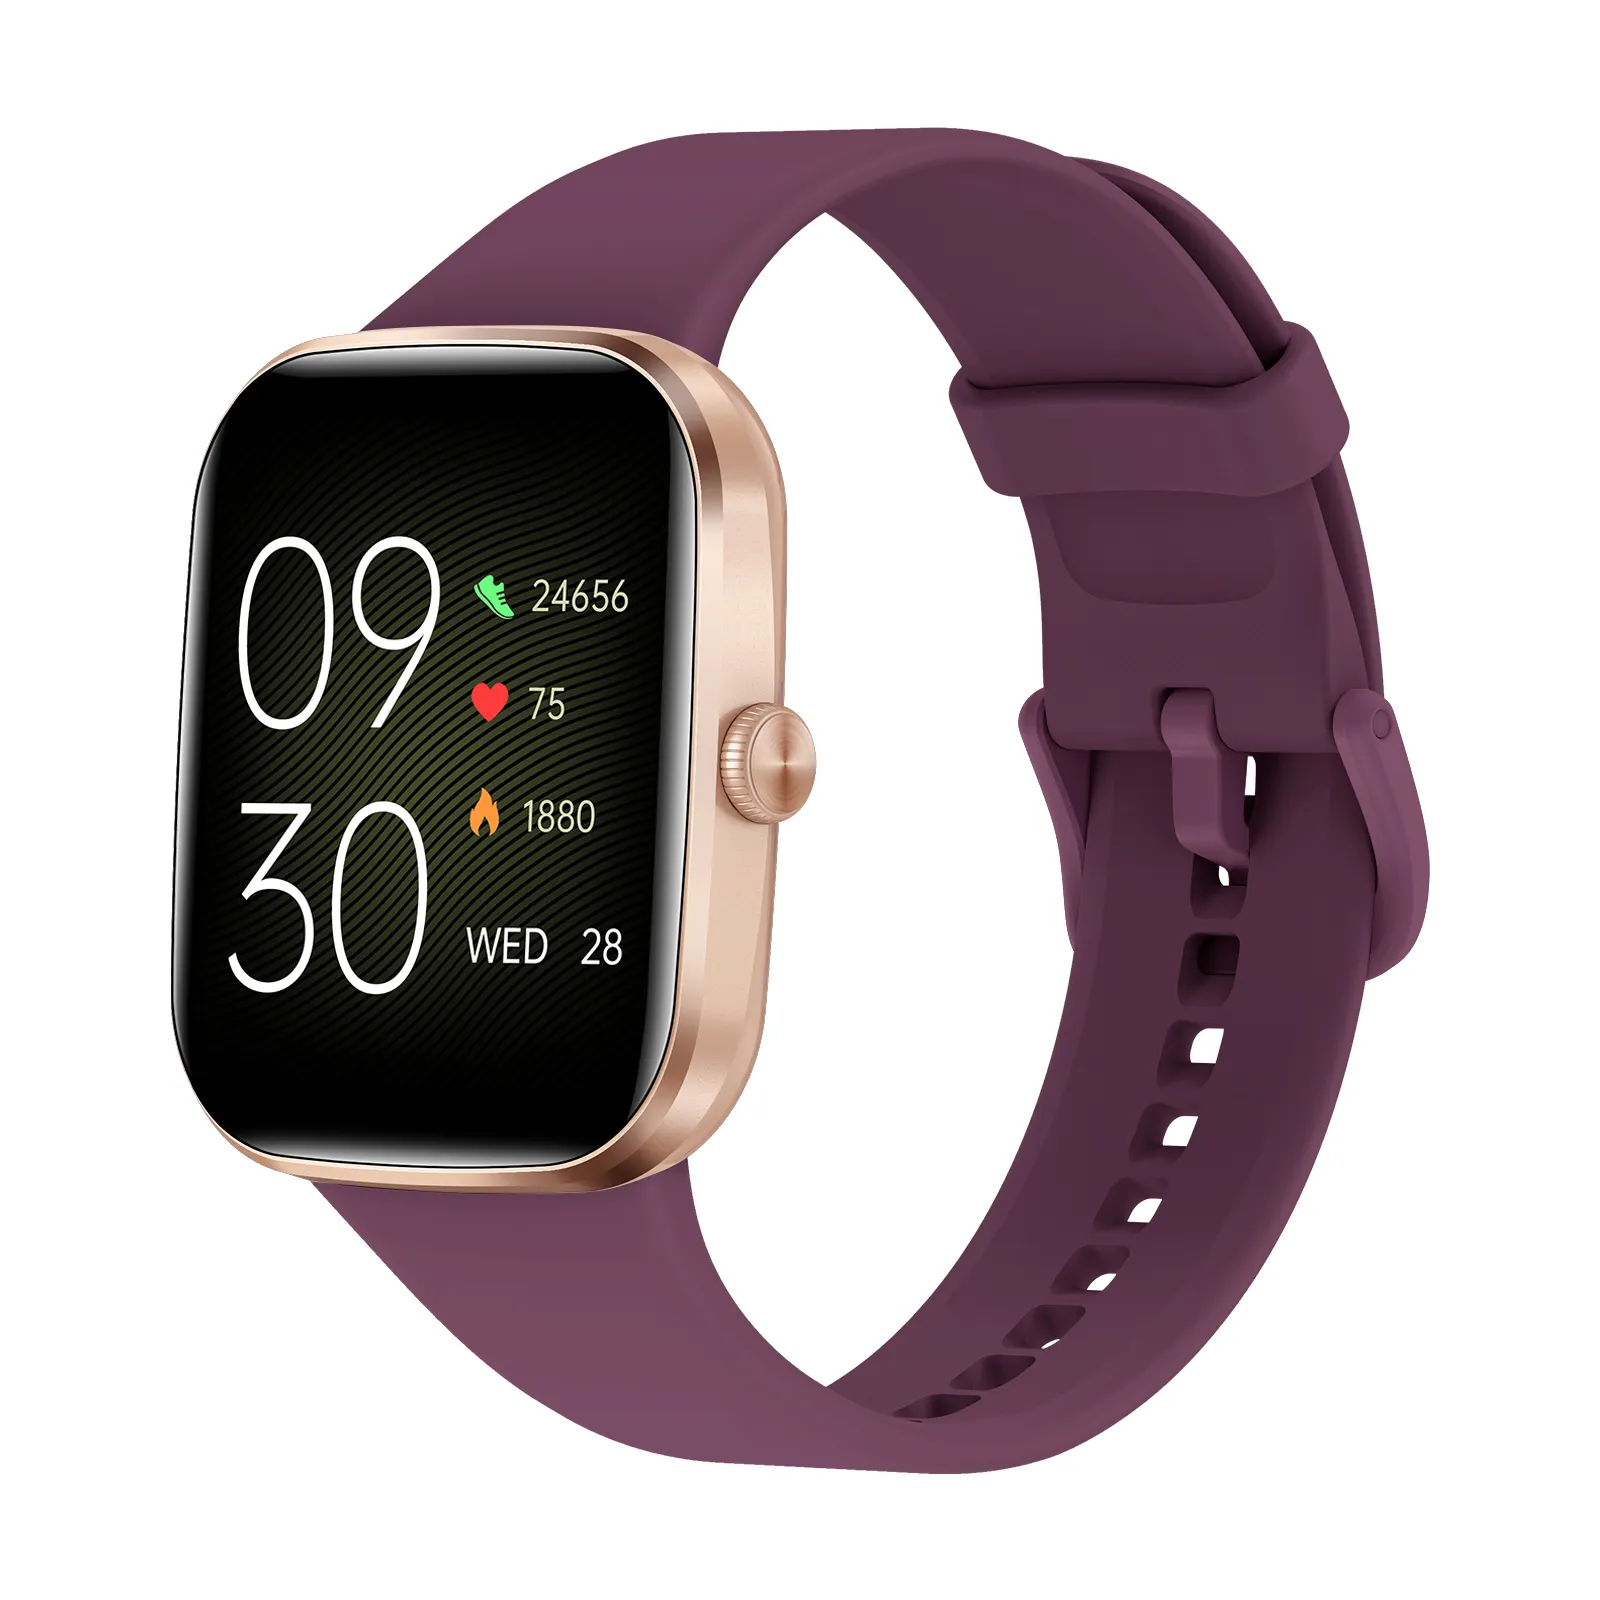 Cross border best-selling Q29 smart watches, with full touch screen fitness, blood pressure and heart rate waterproof functions